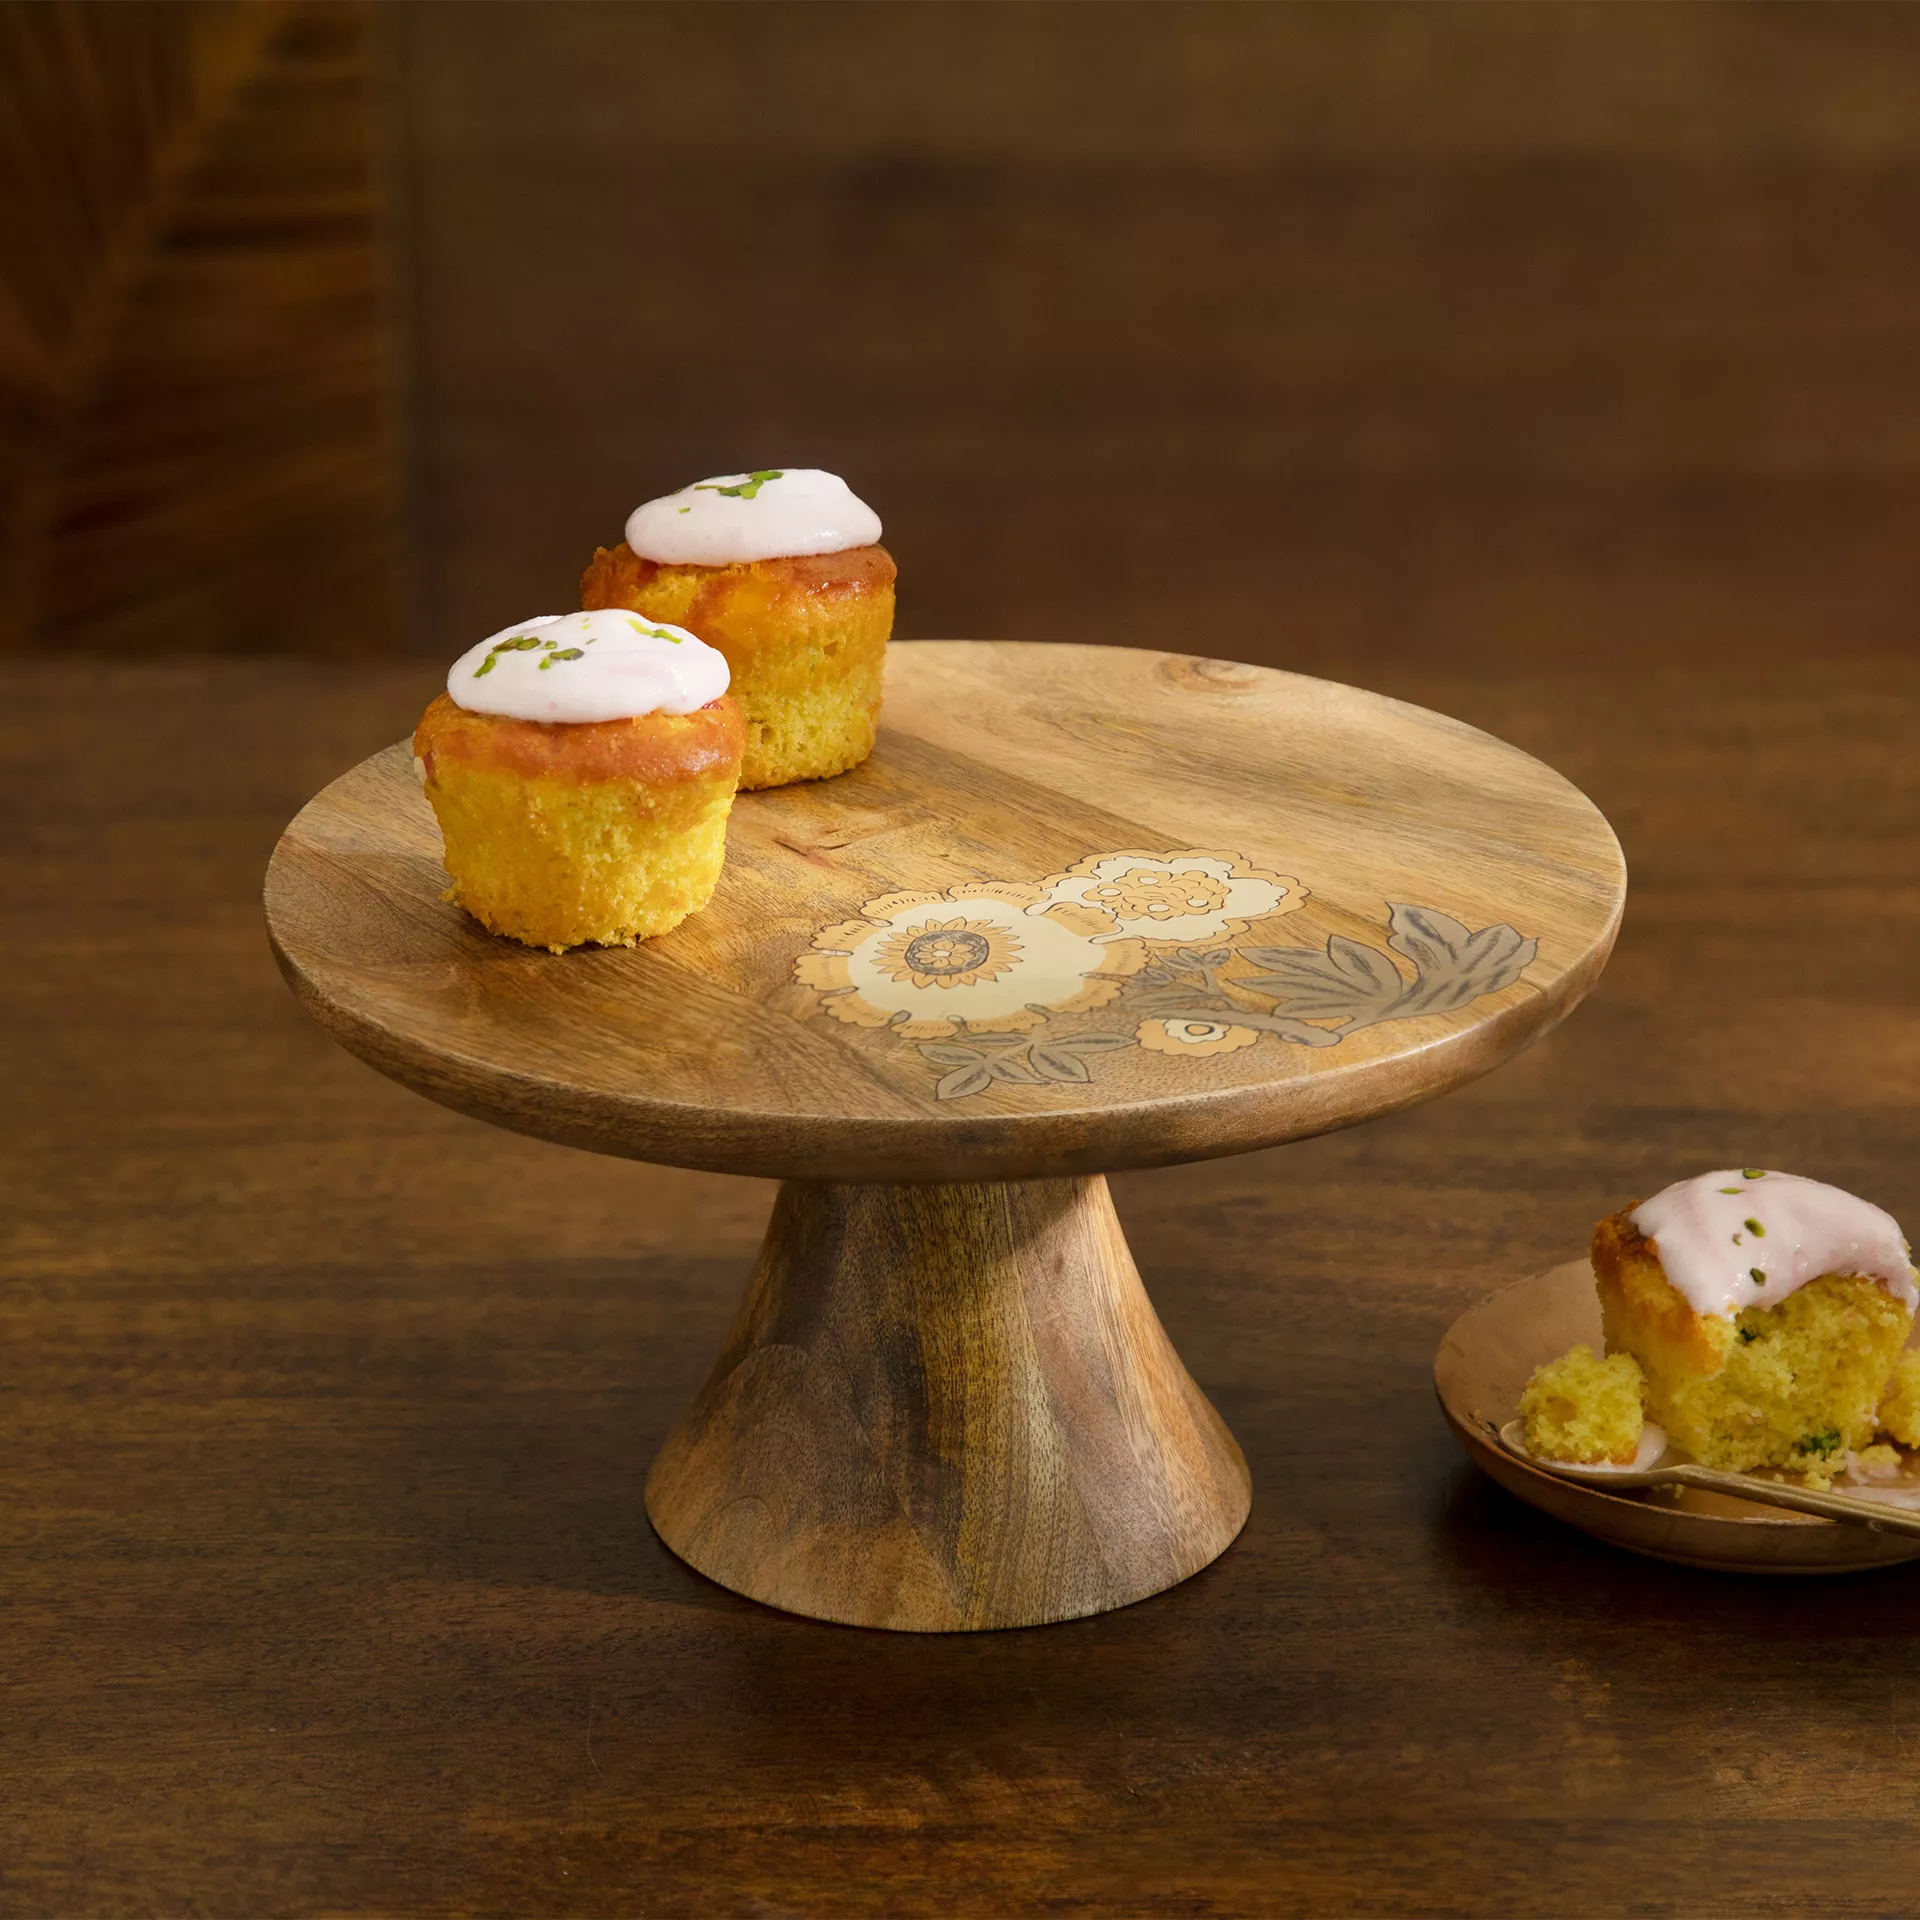 1x4 Wood Cake Stand Plans - 10